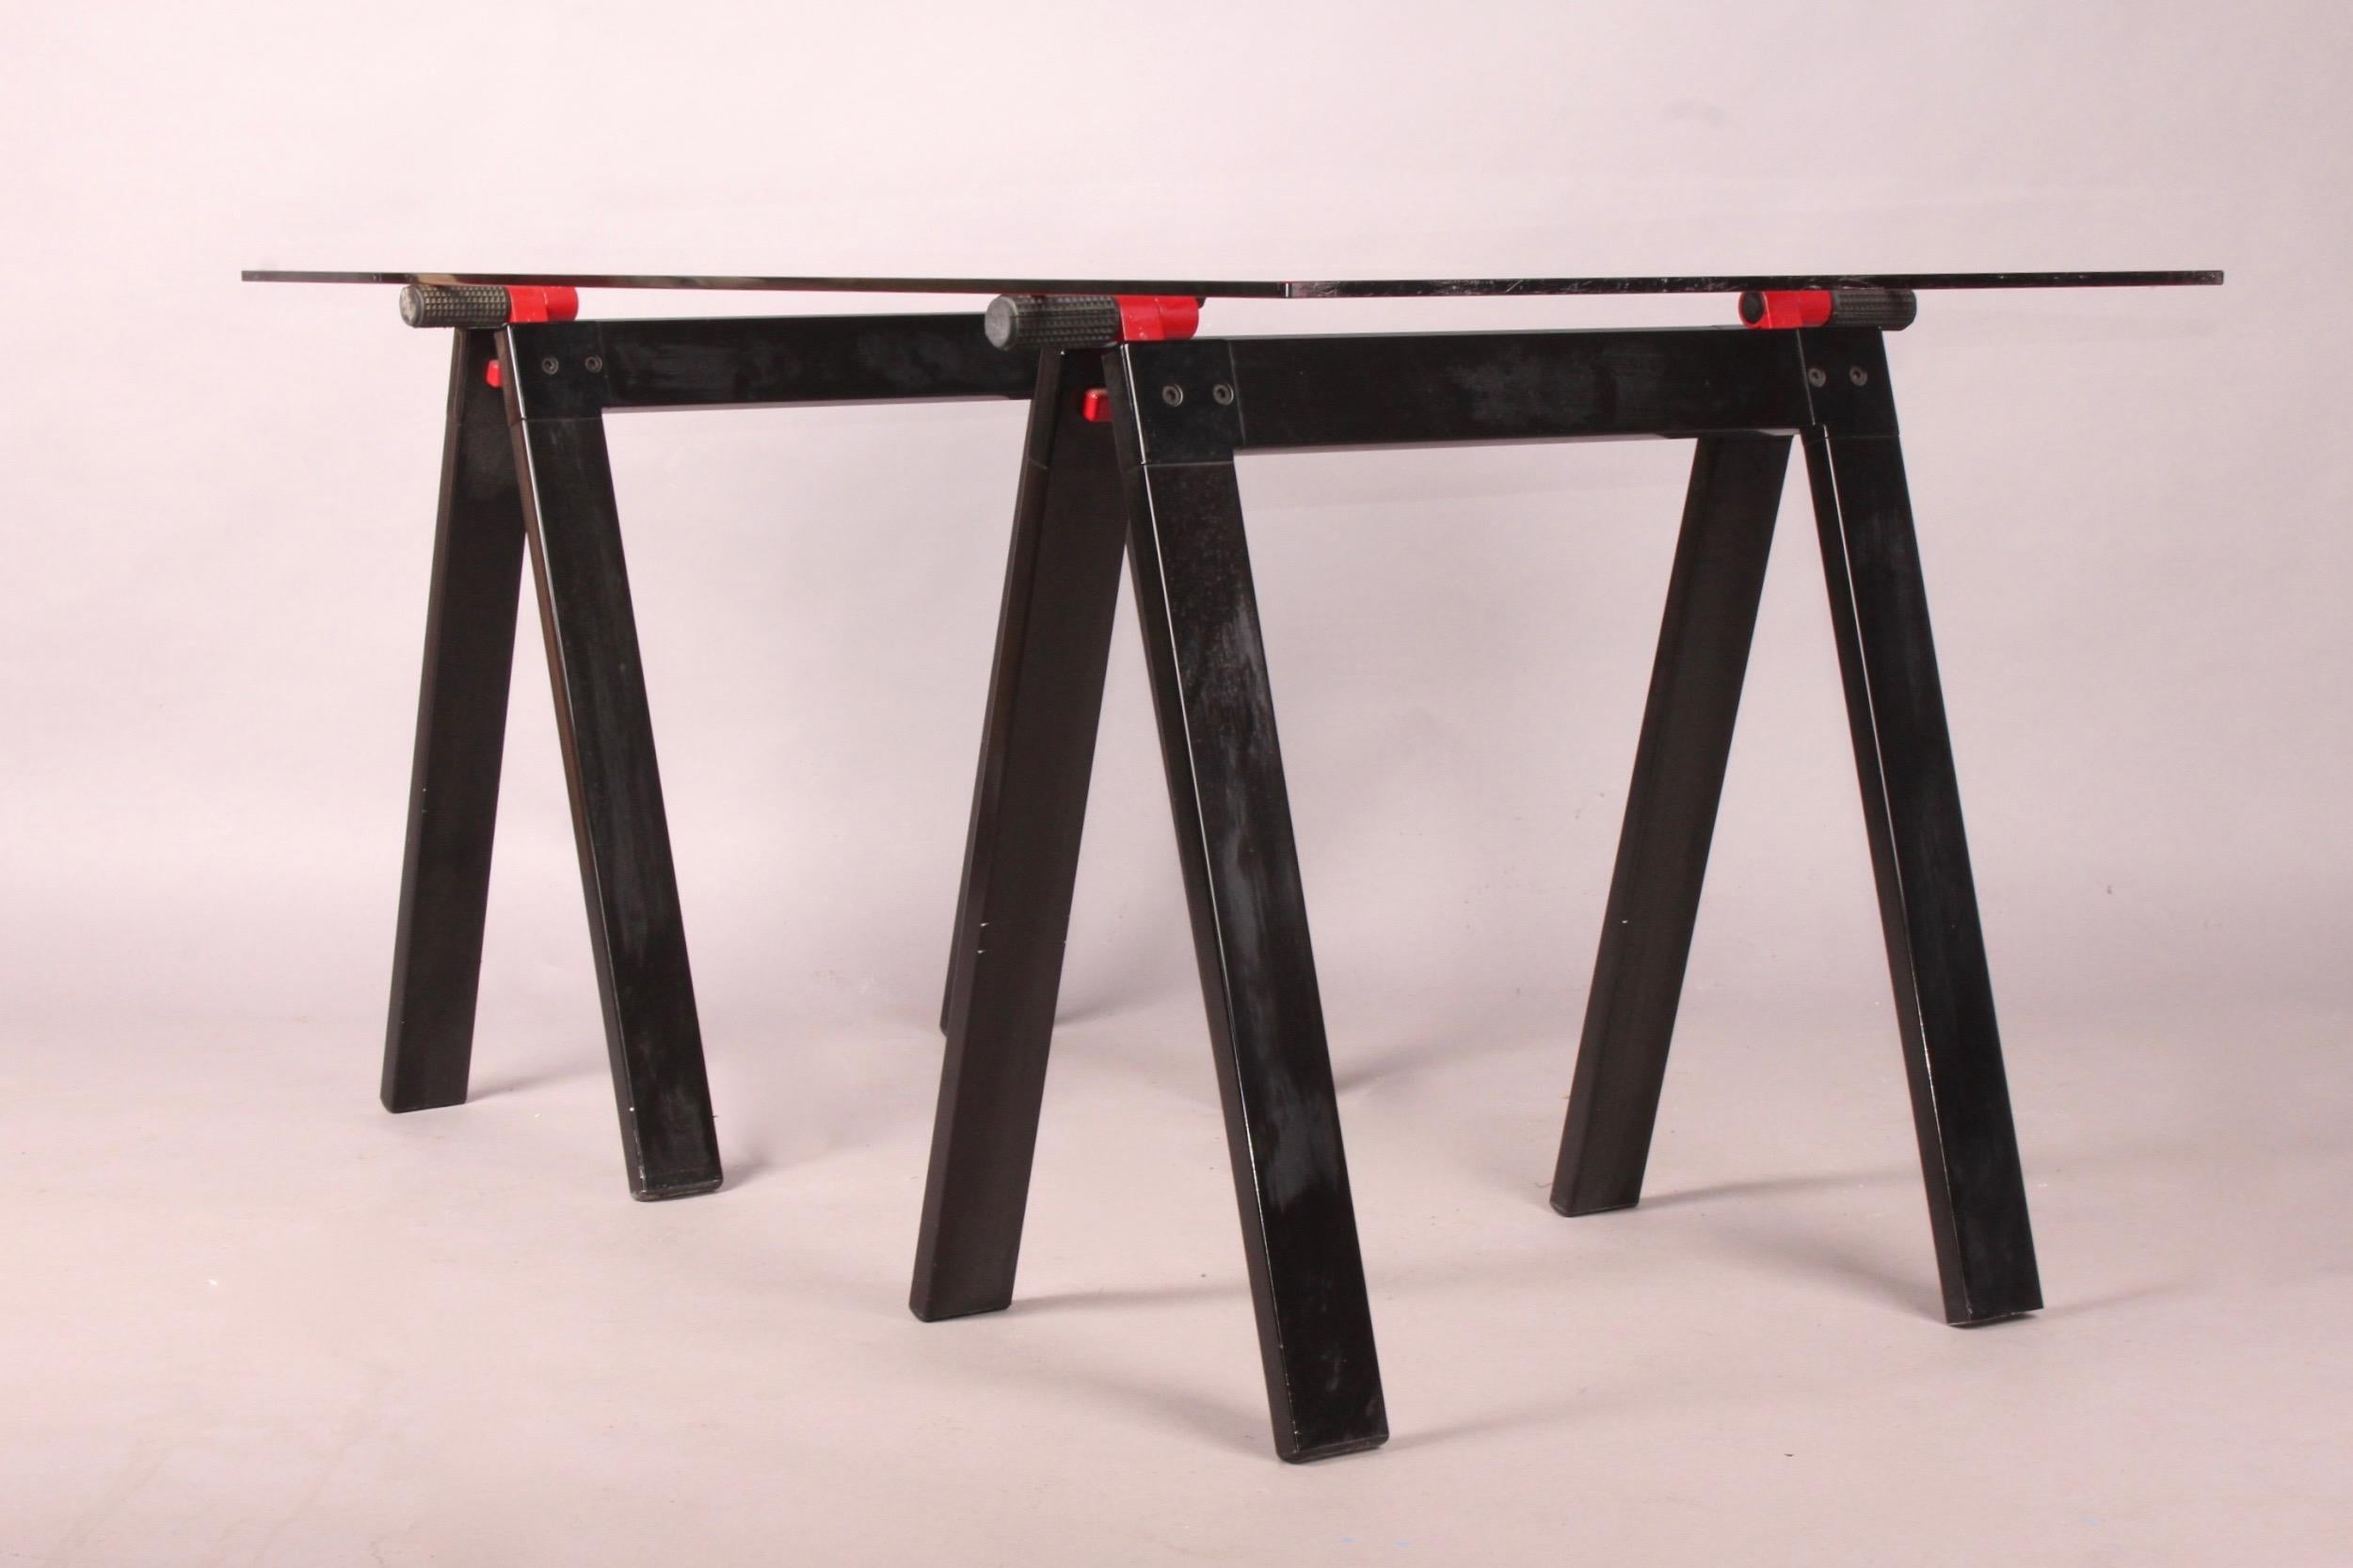 Gaetano working table by Gae Aulenti for Zanotta with original glass top, supported by two black and red enameled metal folding working horses alike base, one plastic base is missing.